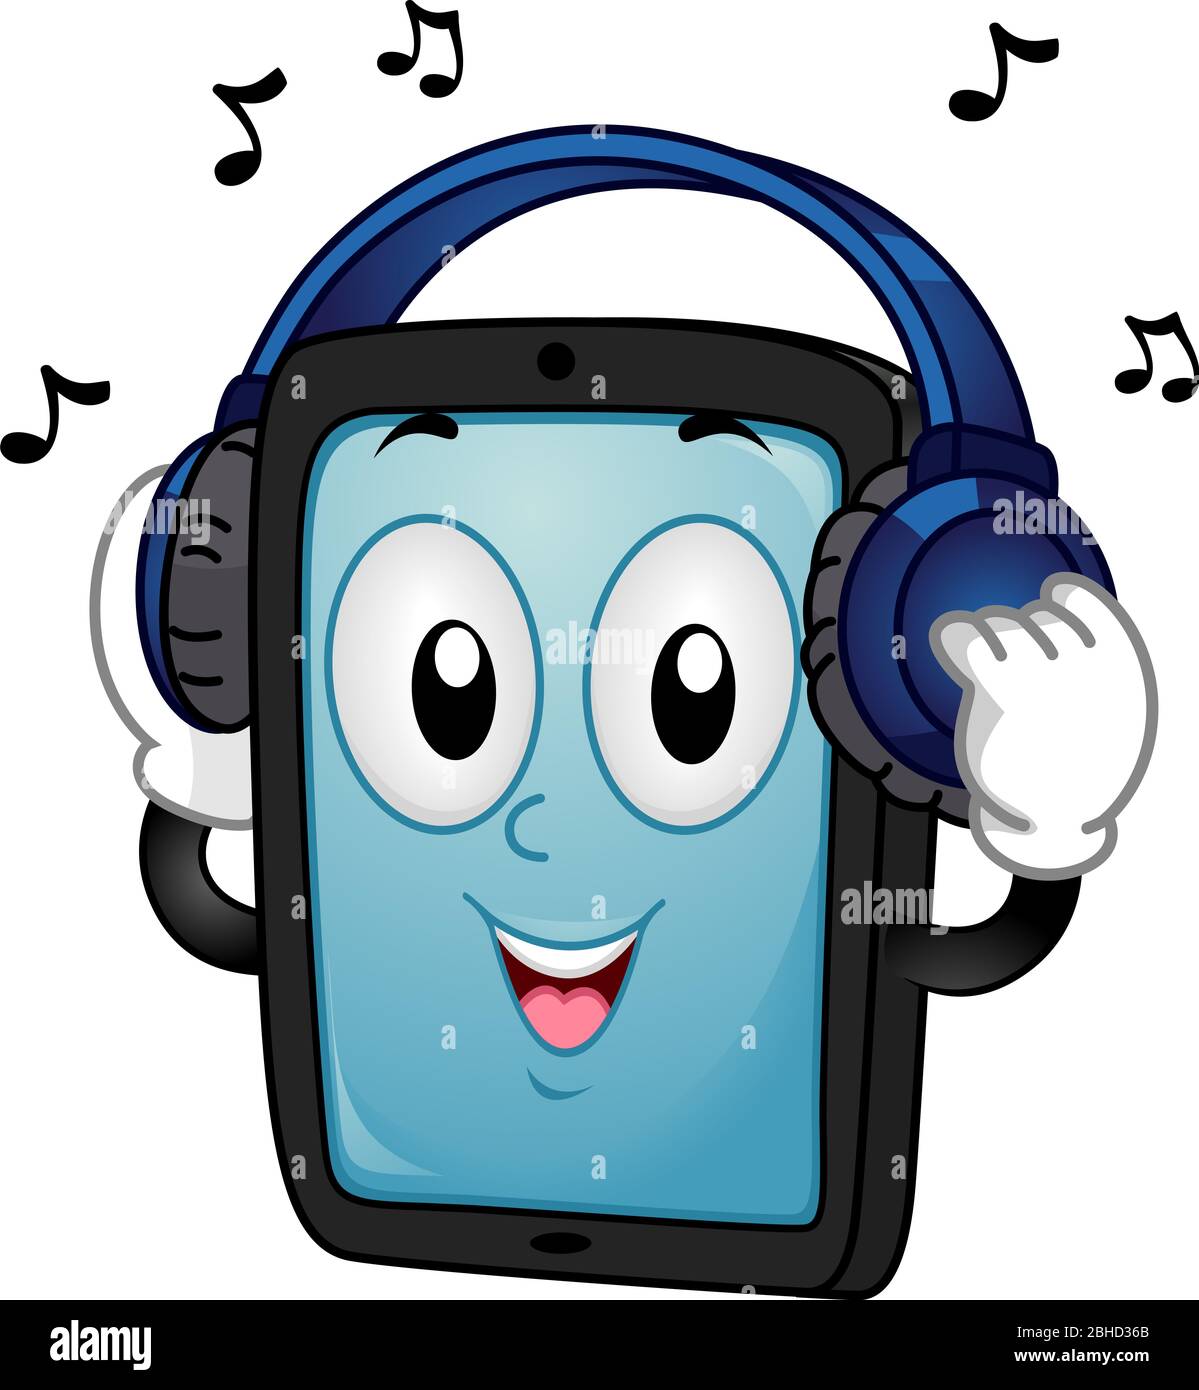 Cartoon headphones Cut Out Stock Images & Pictures - Page 2 - Alamy